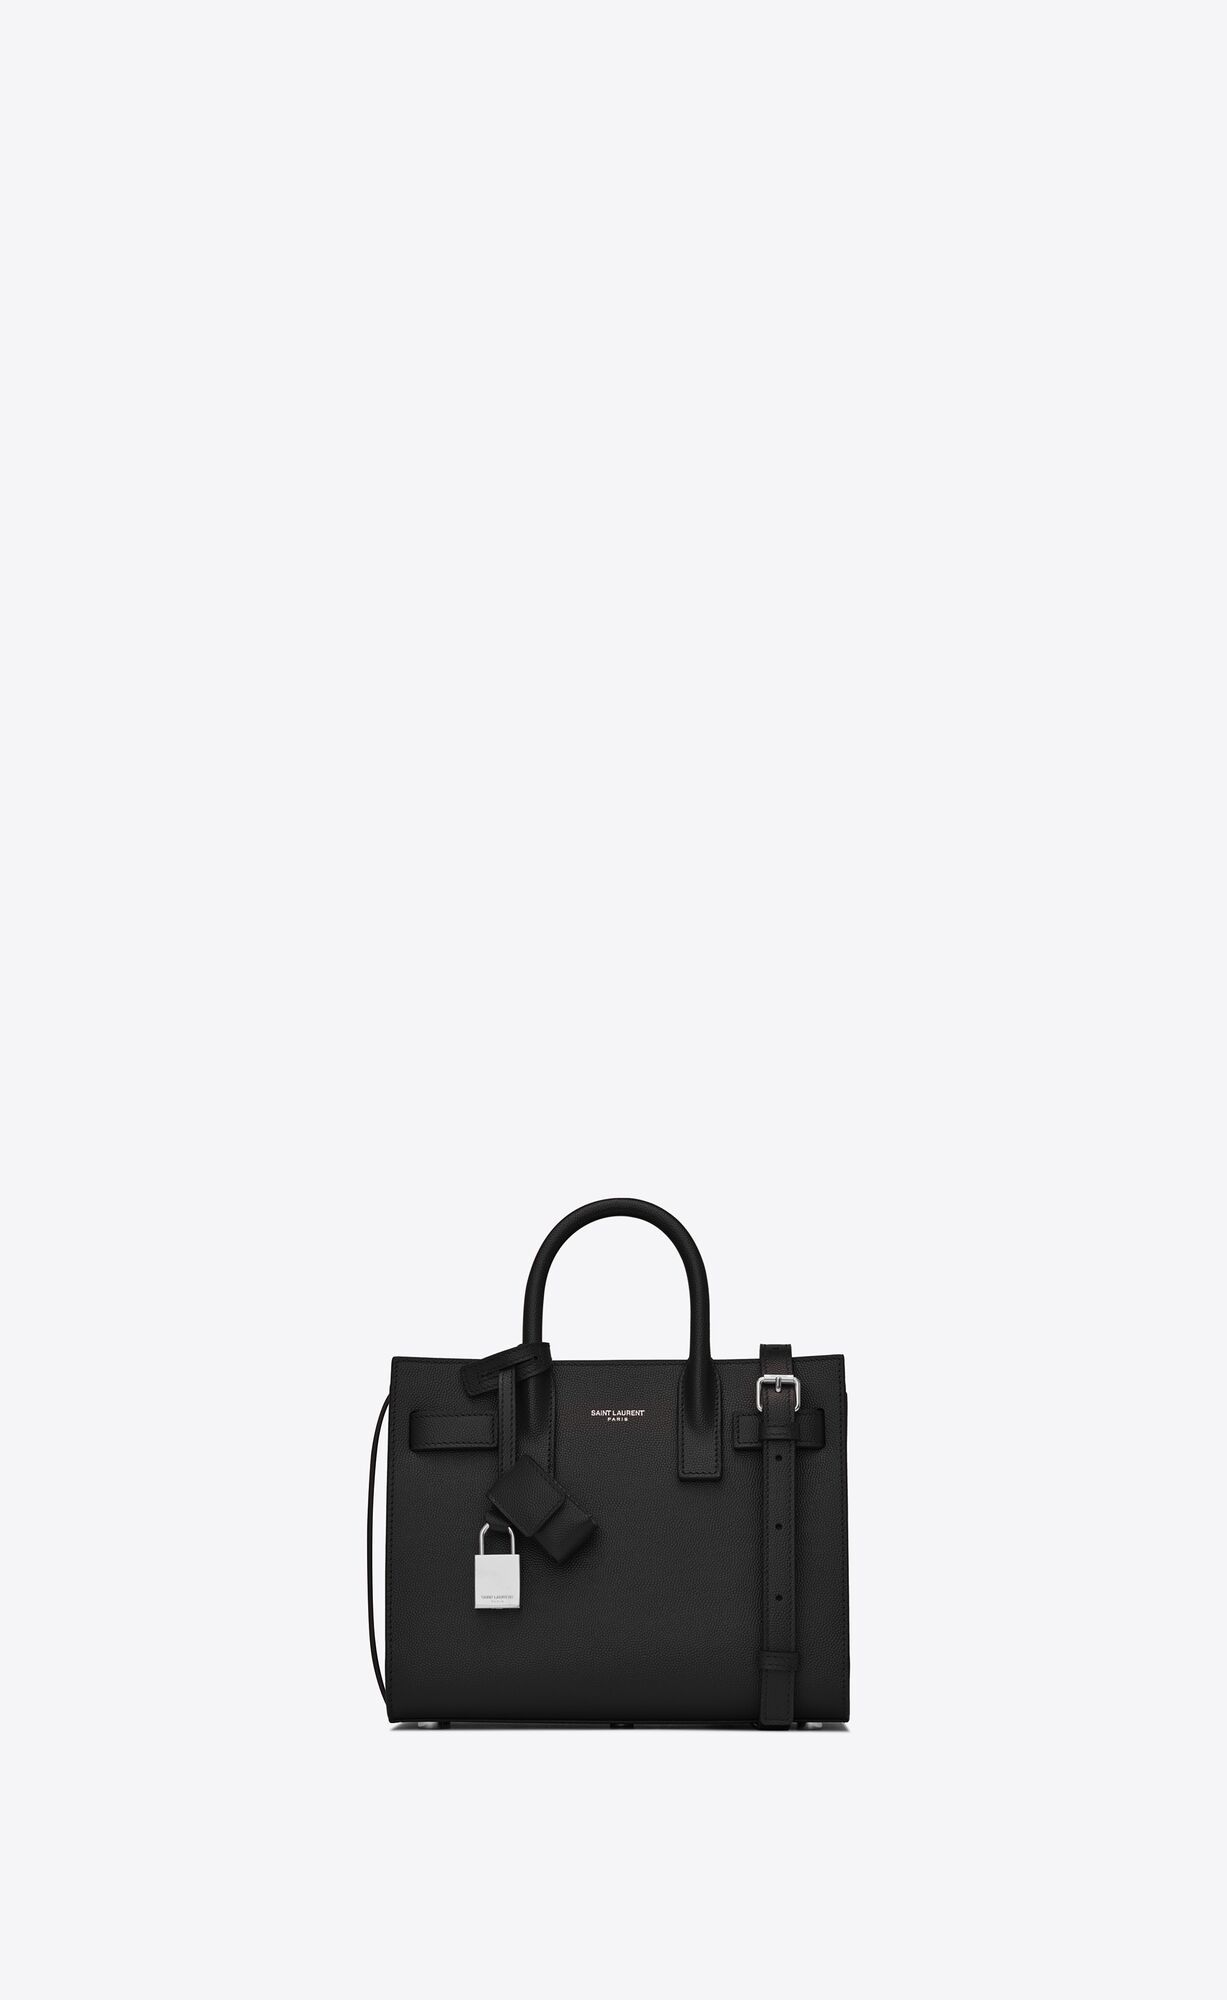 Sac de jour bag in nano version.Compact and leather-lined, it is distinguishable by its accordion... | Saint Laurent Inc. (Global)